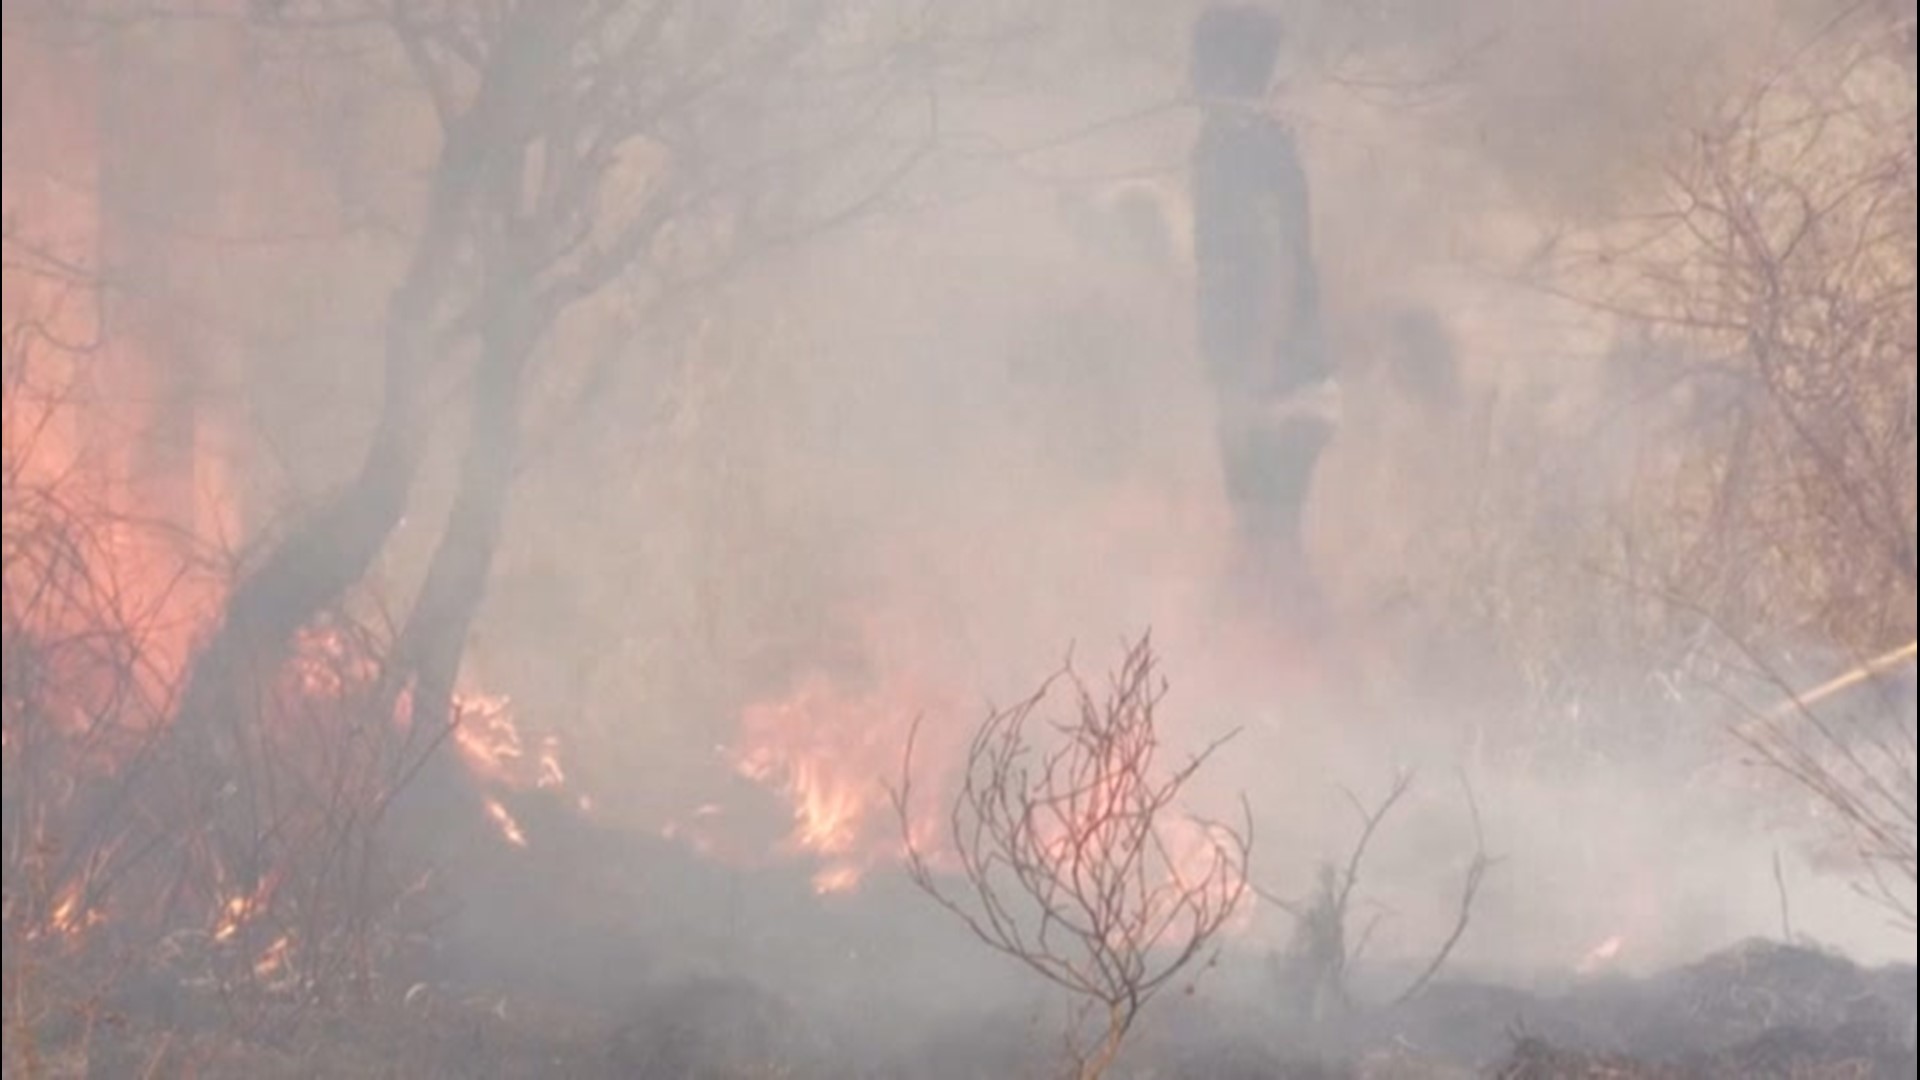 Volunteers raced to battle a wildfire raging in Tsavo National Park in Tsavo, Kenya, on Aug. 9, as the fire scorched through the park. The fire is said to now be contained.